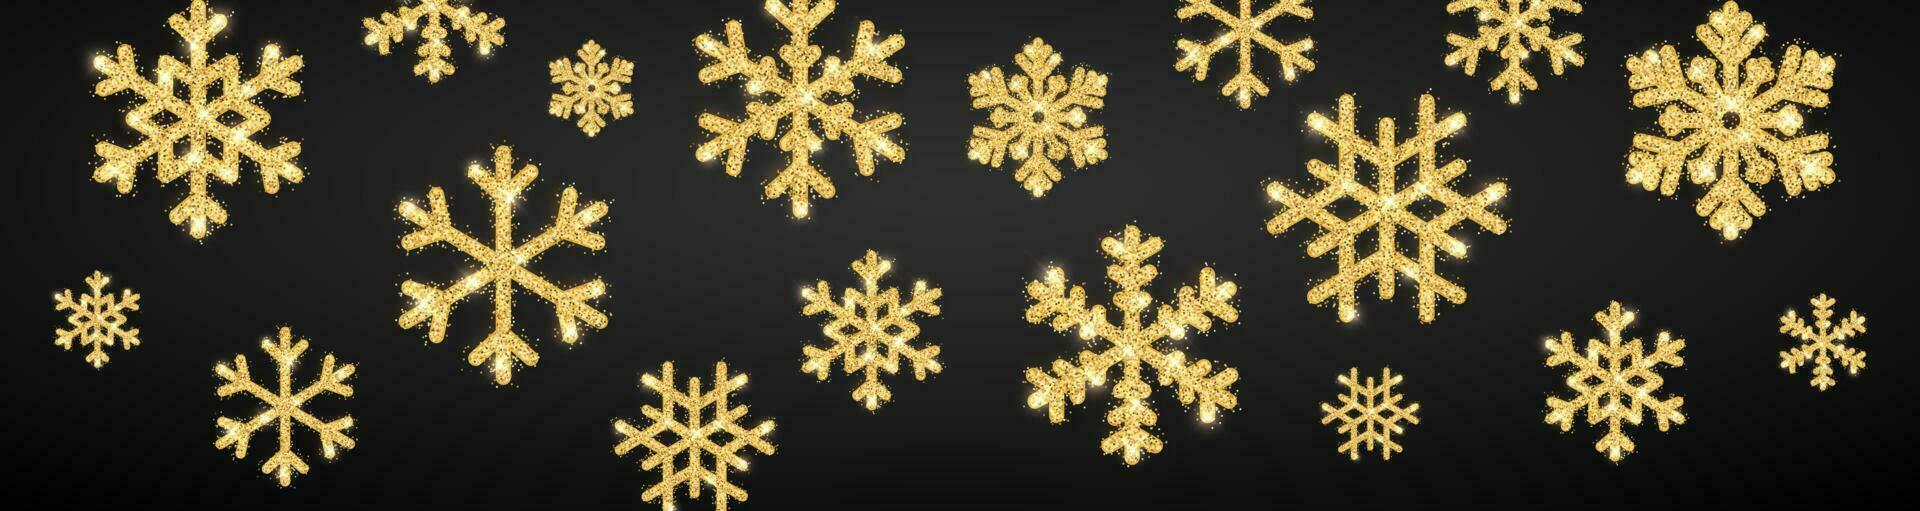 Shining gold snowflakes on black background. Christmas and New Year background. Vector illustration